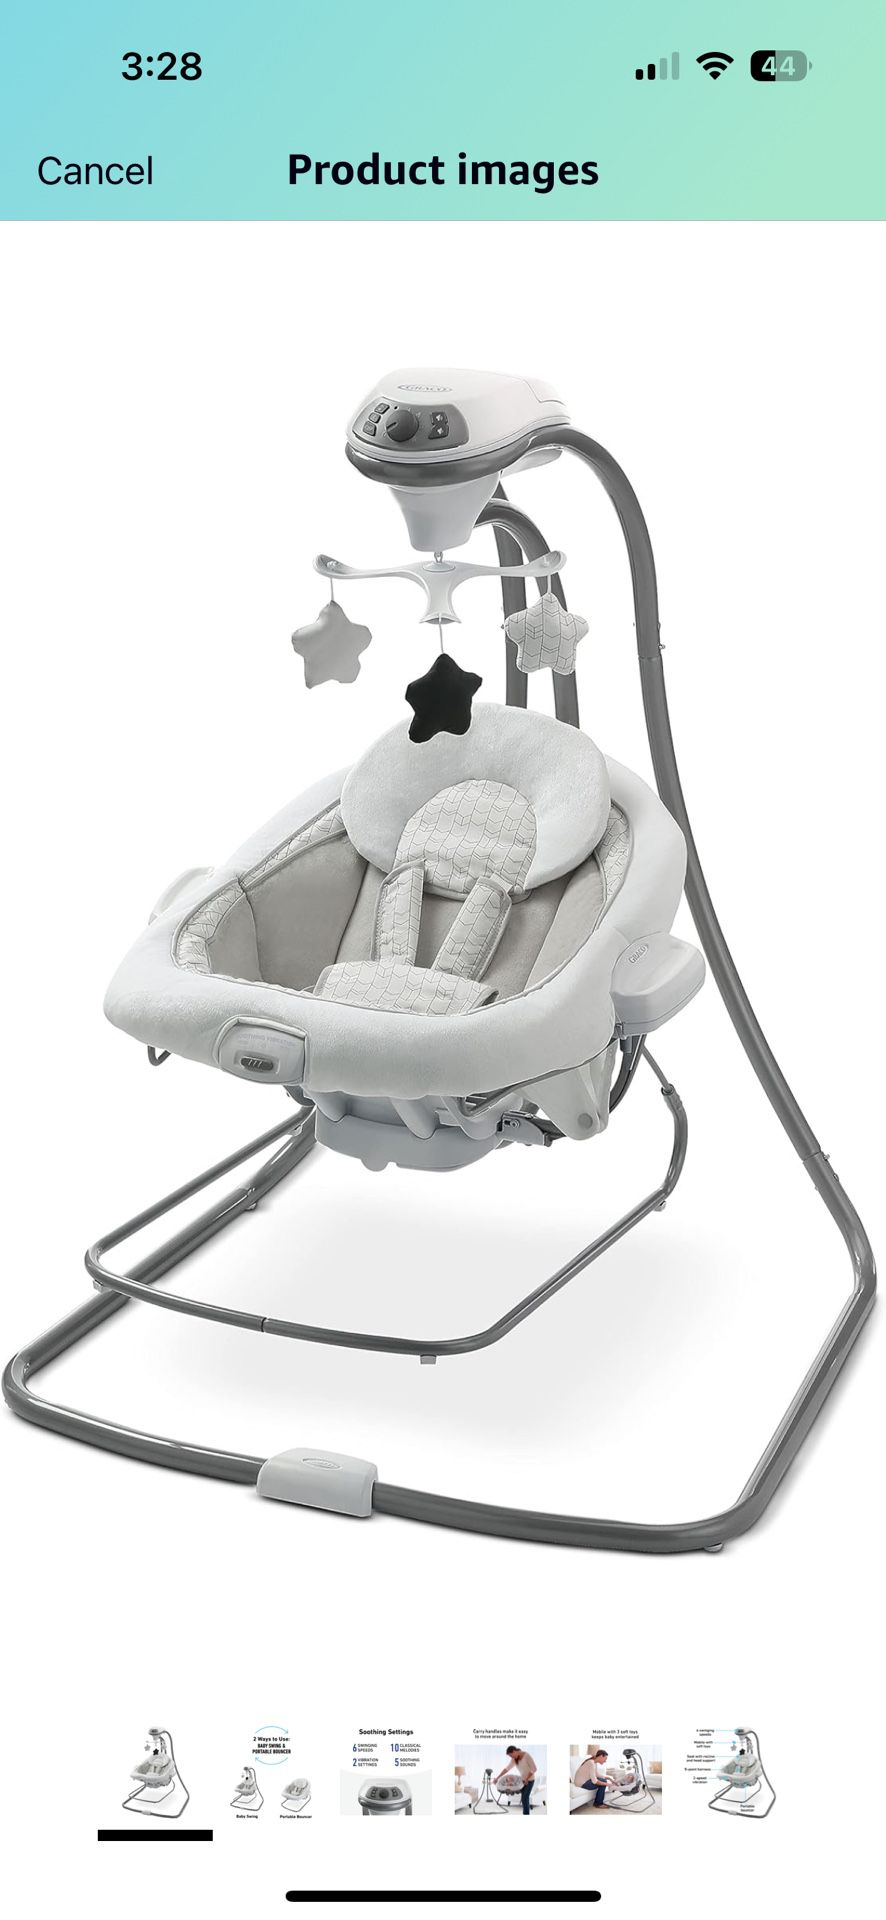 NEW Graco DuetConnect LX — $100